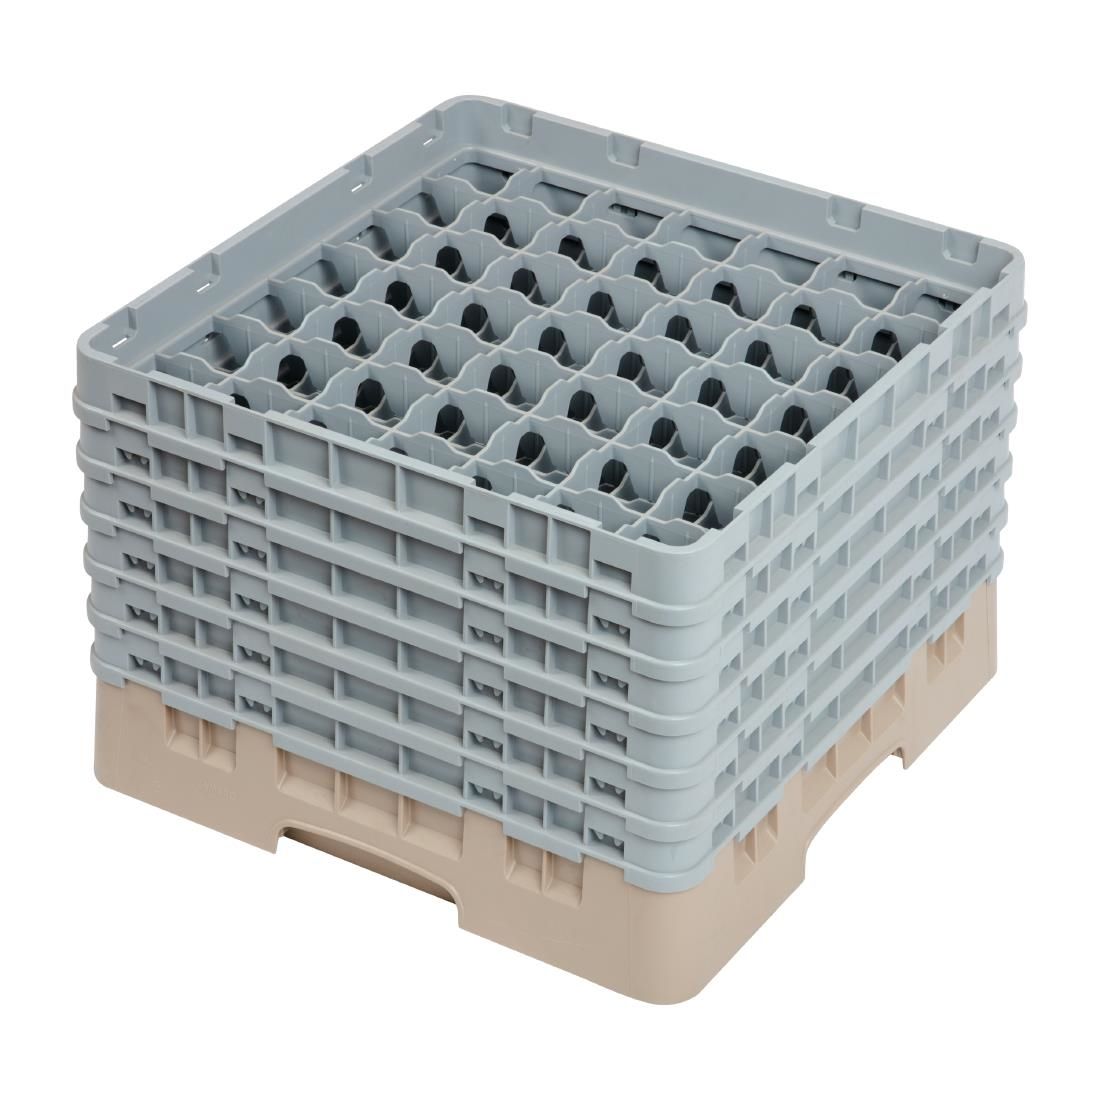 Cambro Camrack Beige 49 Compartments Max Glass Height 298mm JD Catering Equipment Solutions Ltd